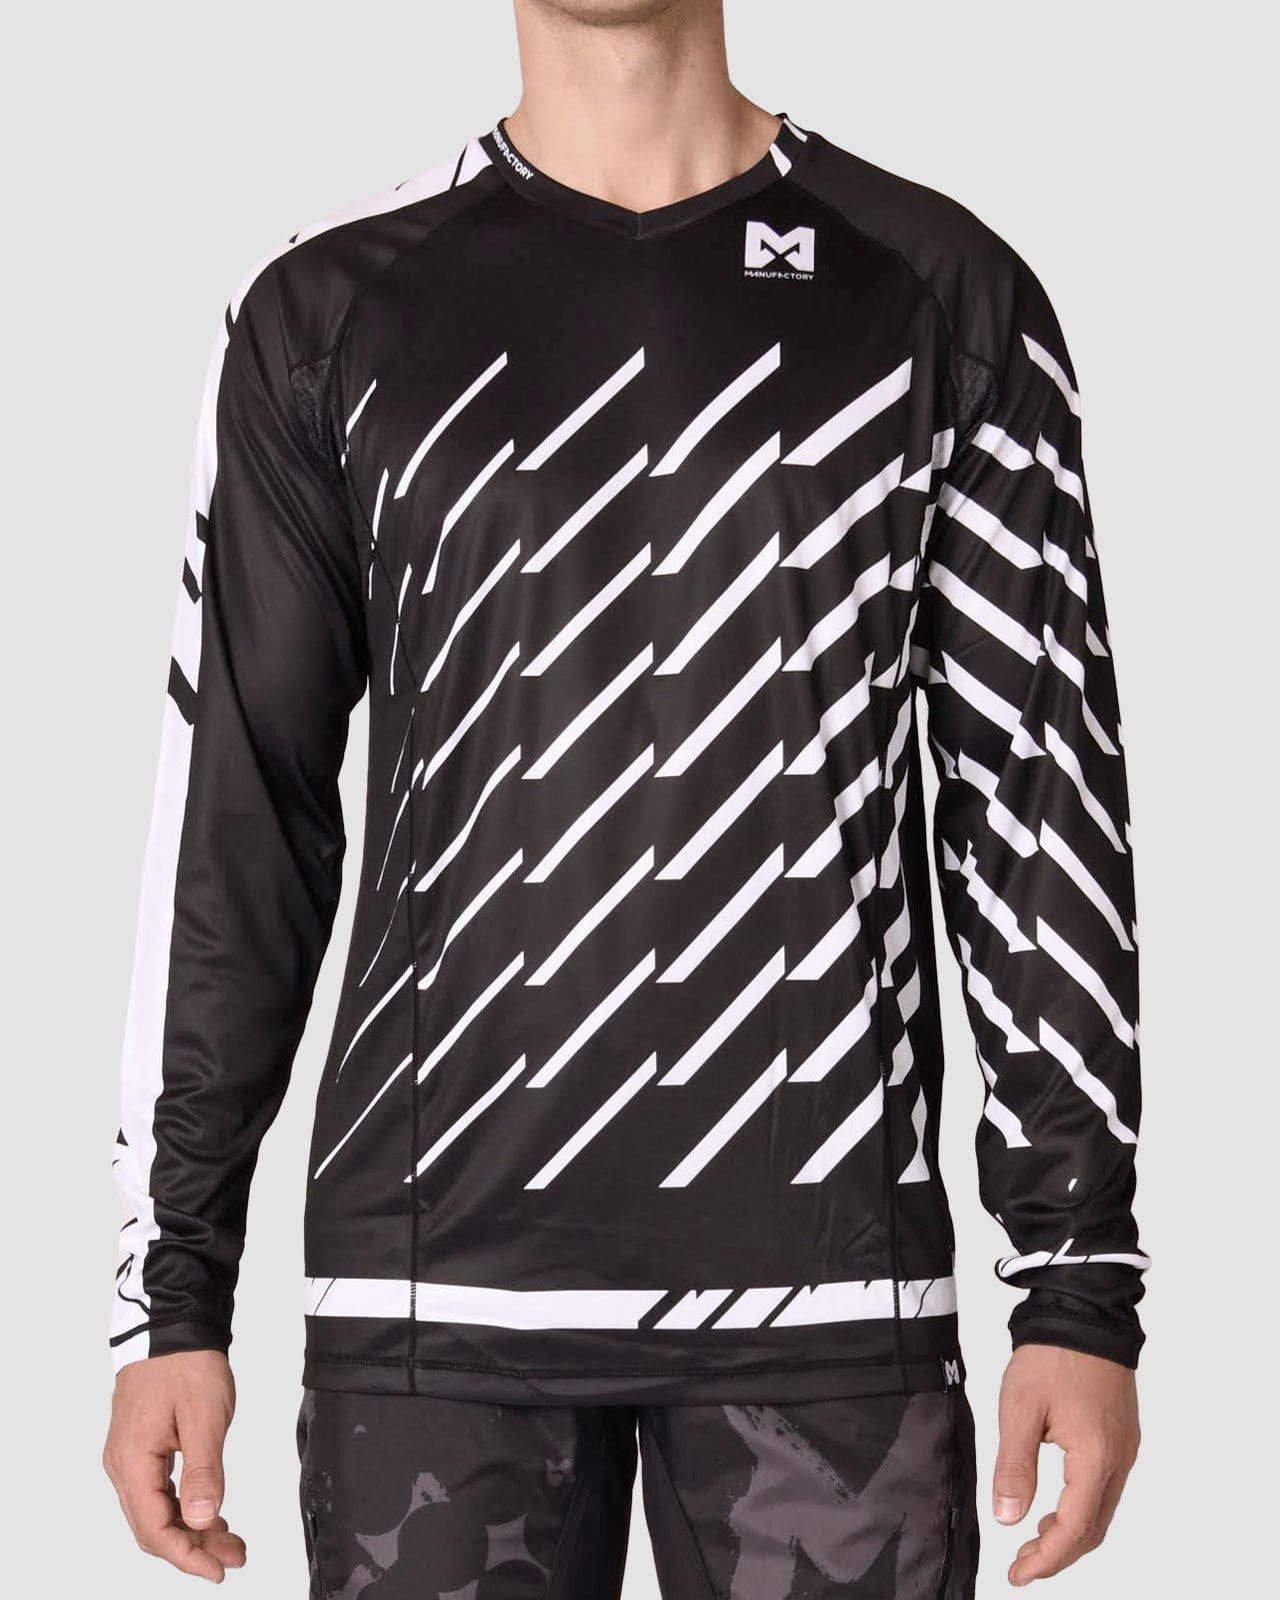 Manufactory Apparel Physical product Electrix MX Series Jersey